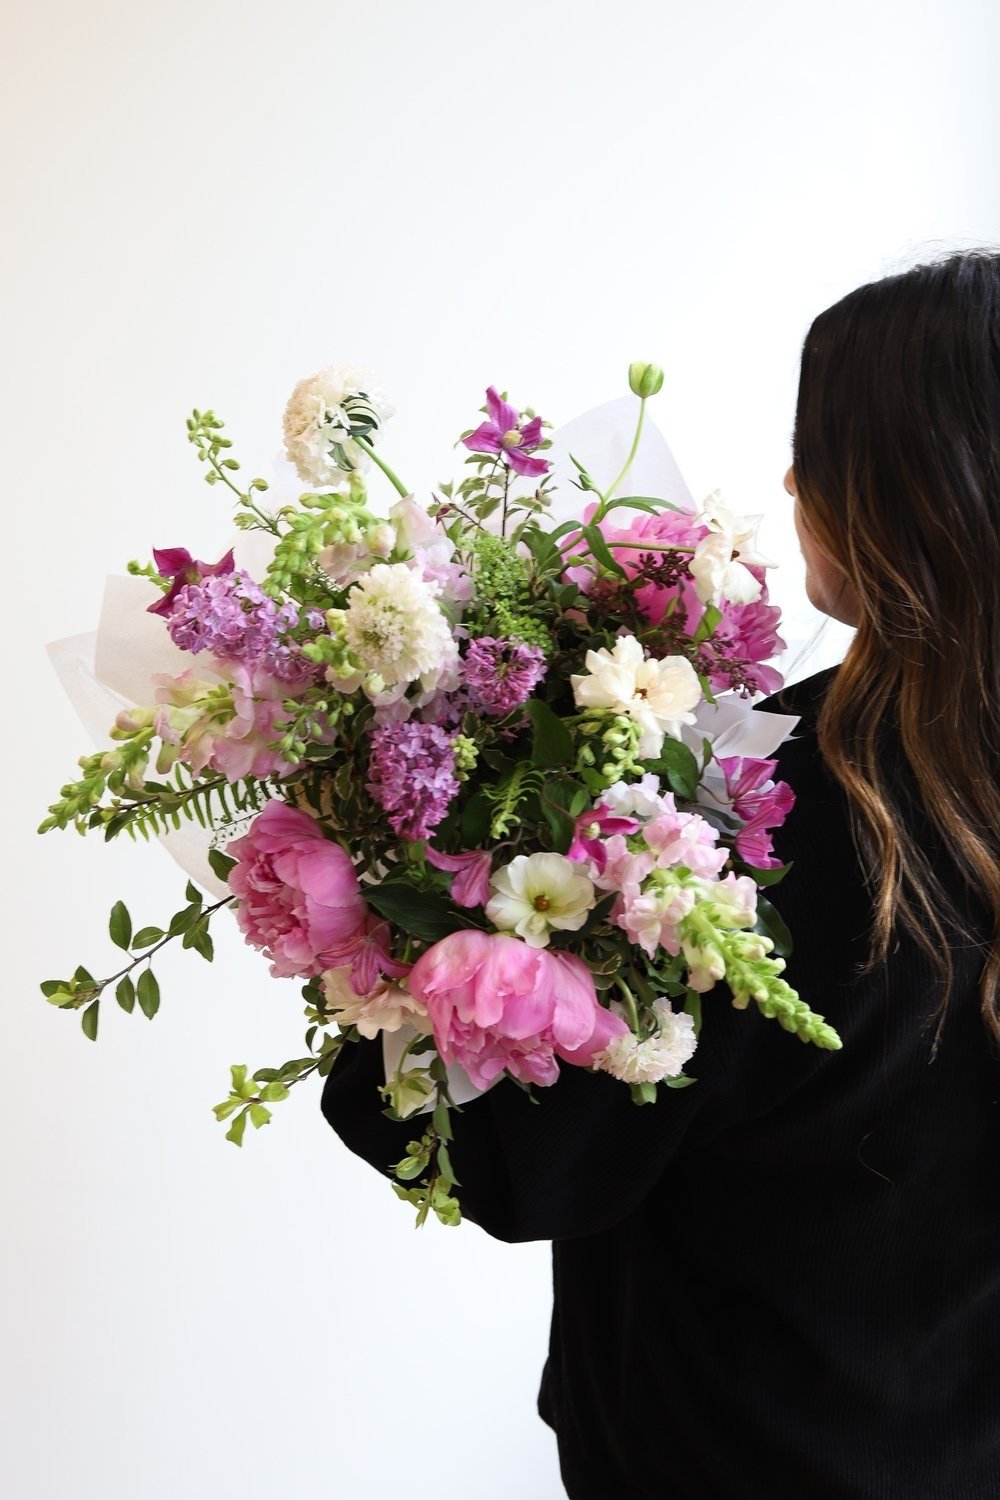 We're so excitied to be making so many Mother's happy... this year &amp; every year :) 

It's not too late to place an order online. Our fresh flroal offerings for walk-ins will be limited so don't miss out!

#mothersdayboston #mothersdayflowers #mot